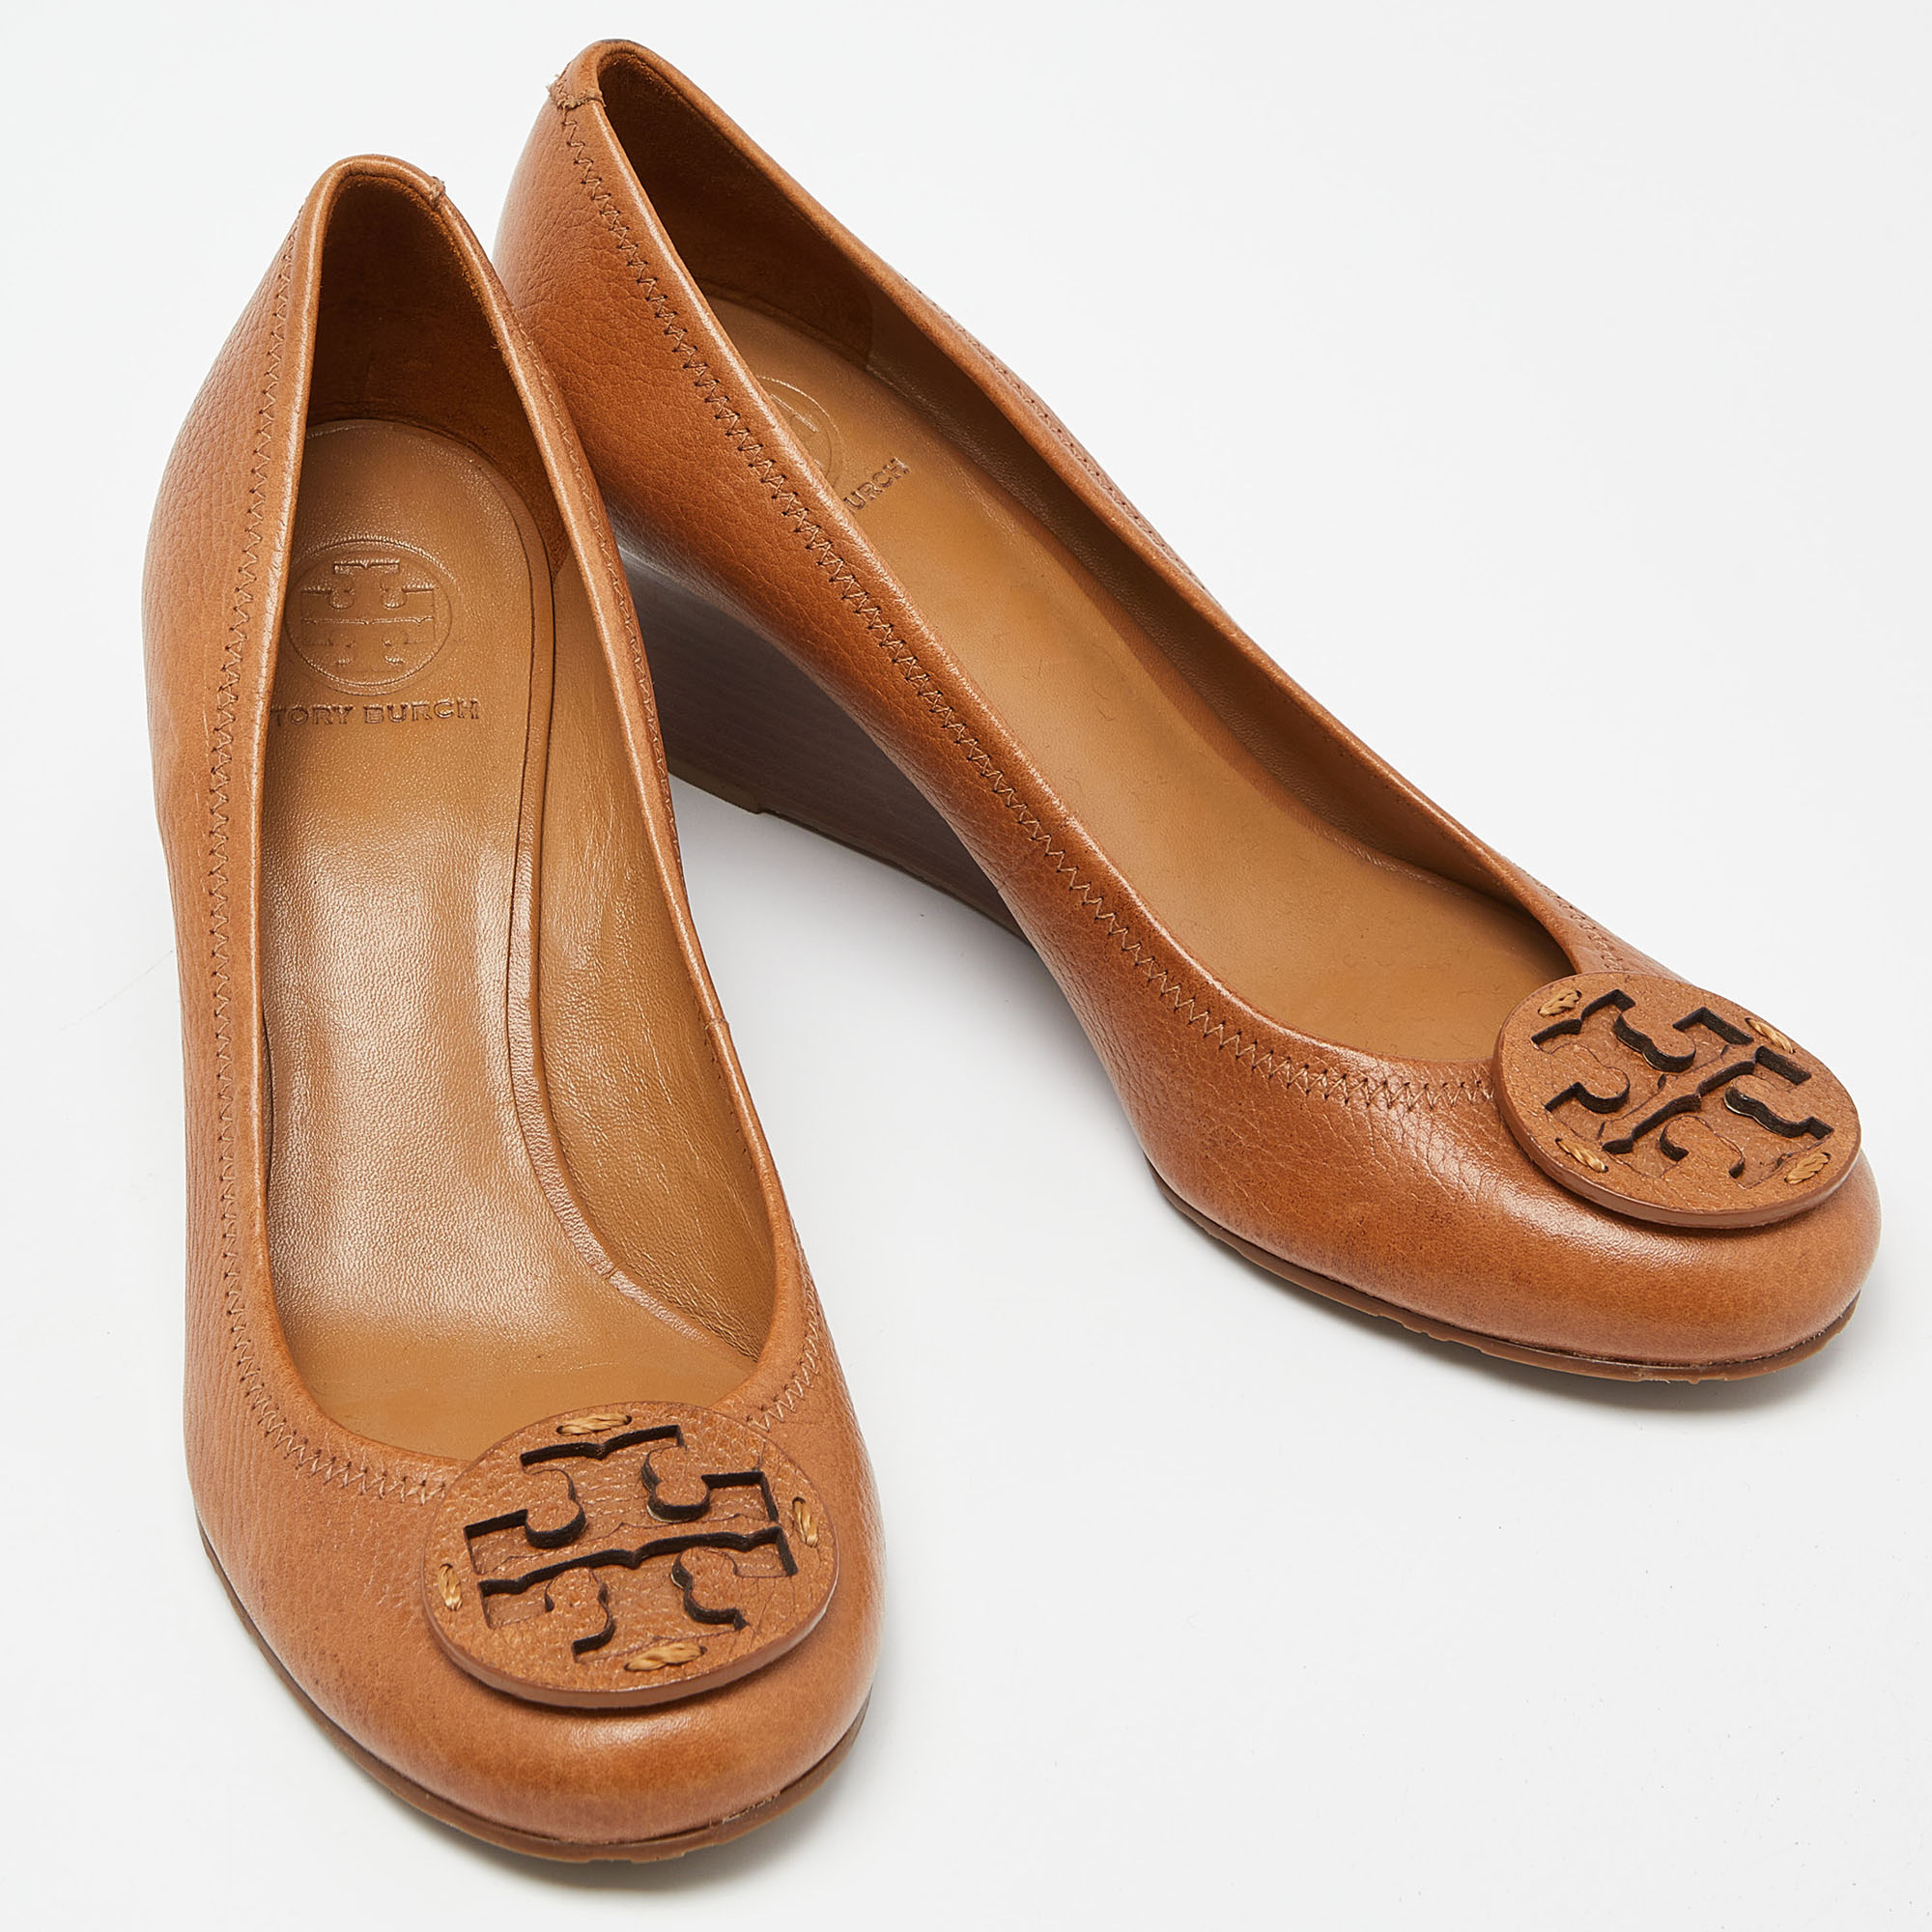 Tory Burch Brown Leather Sally Wedge Pumps Size 40.5